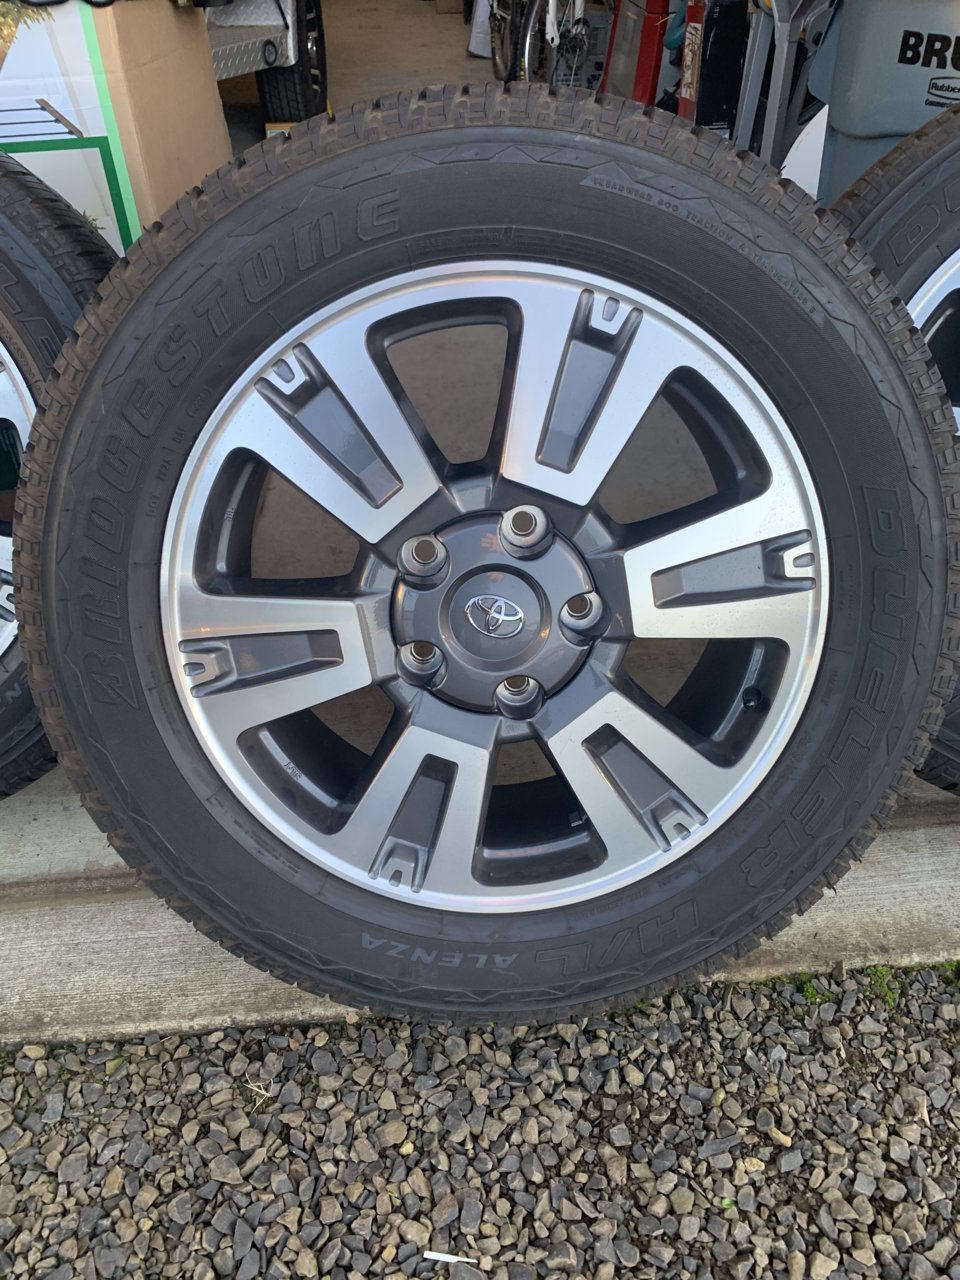 2021 OEM PLATINUM WHEELS AND TIRES FOR SALE - TAKE OFFS $425 | Toyota